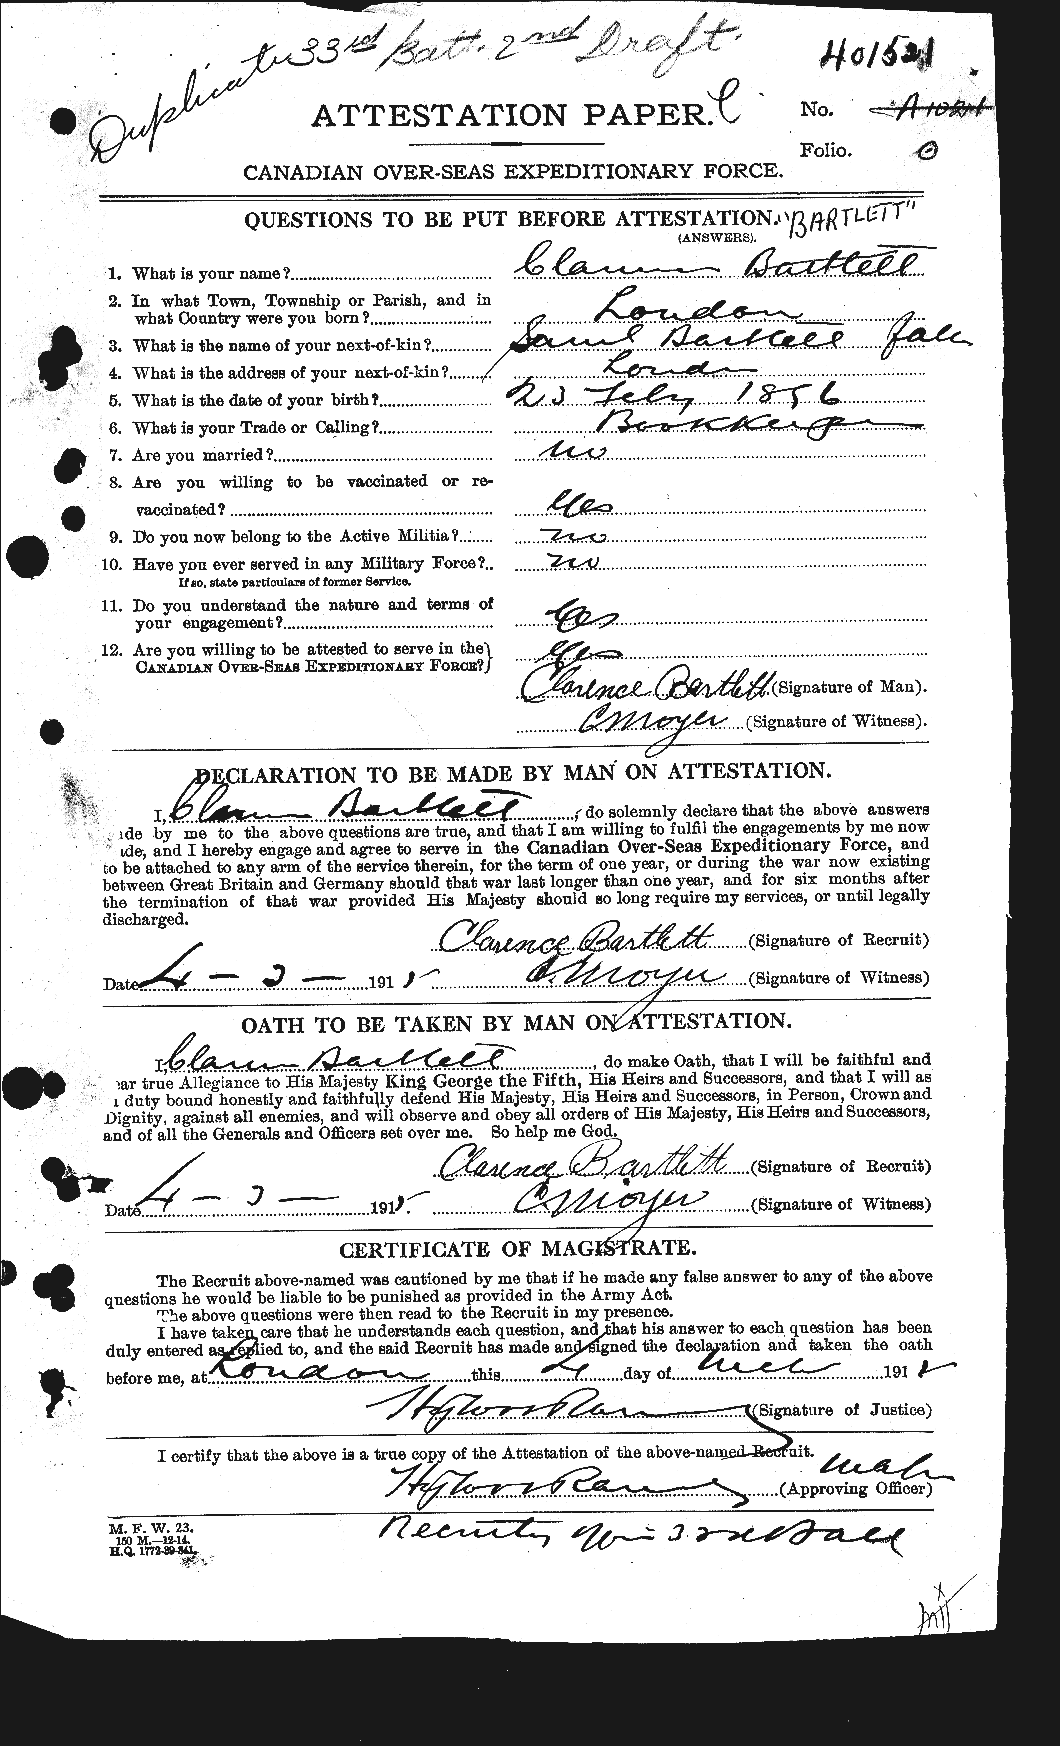 Personnel Records of the First World War - CEF 229192a